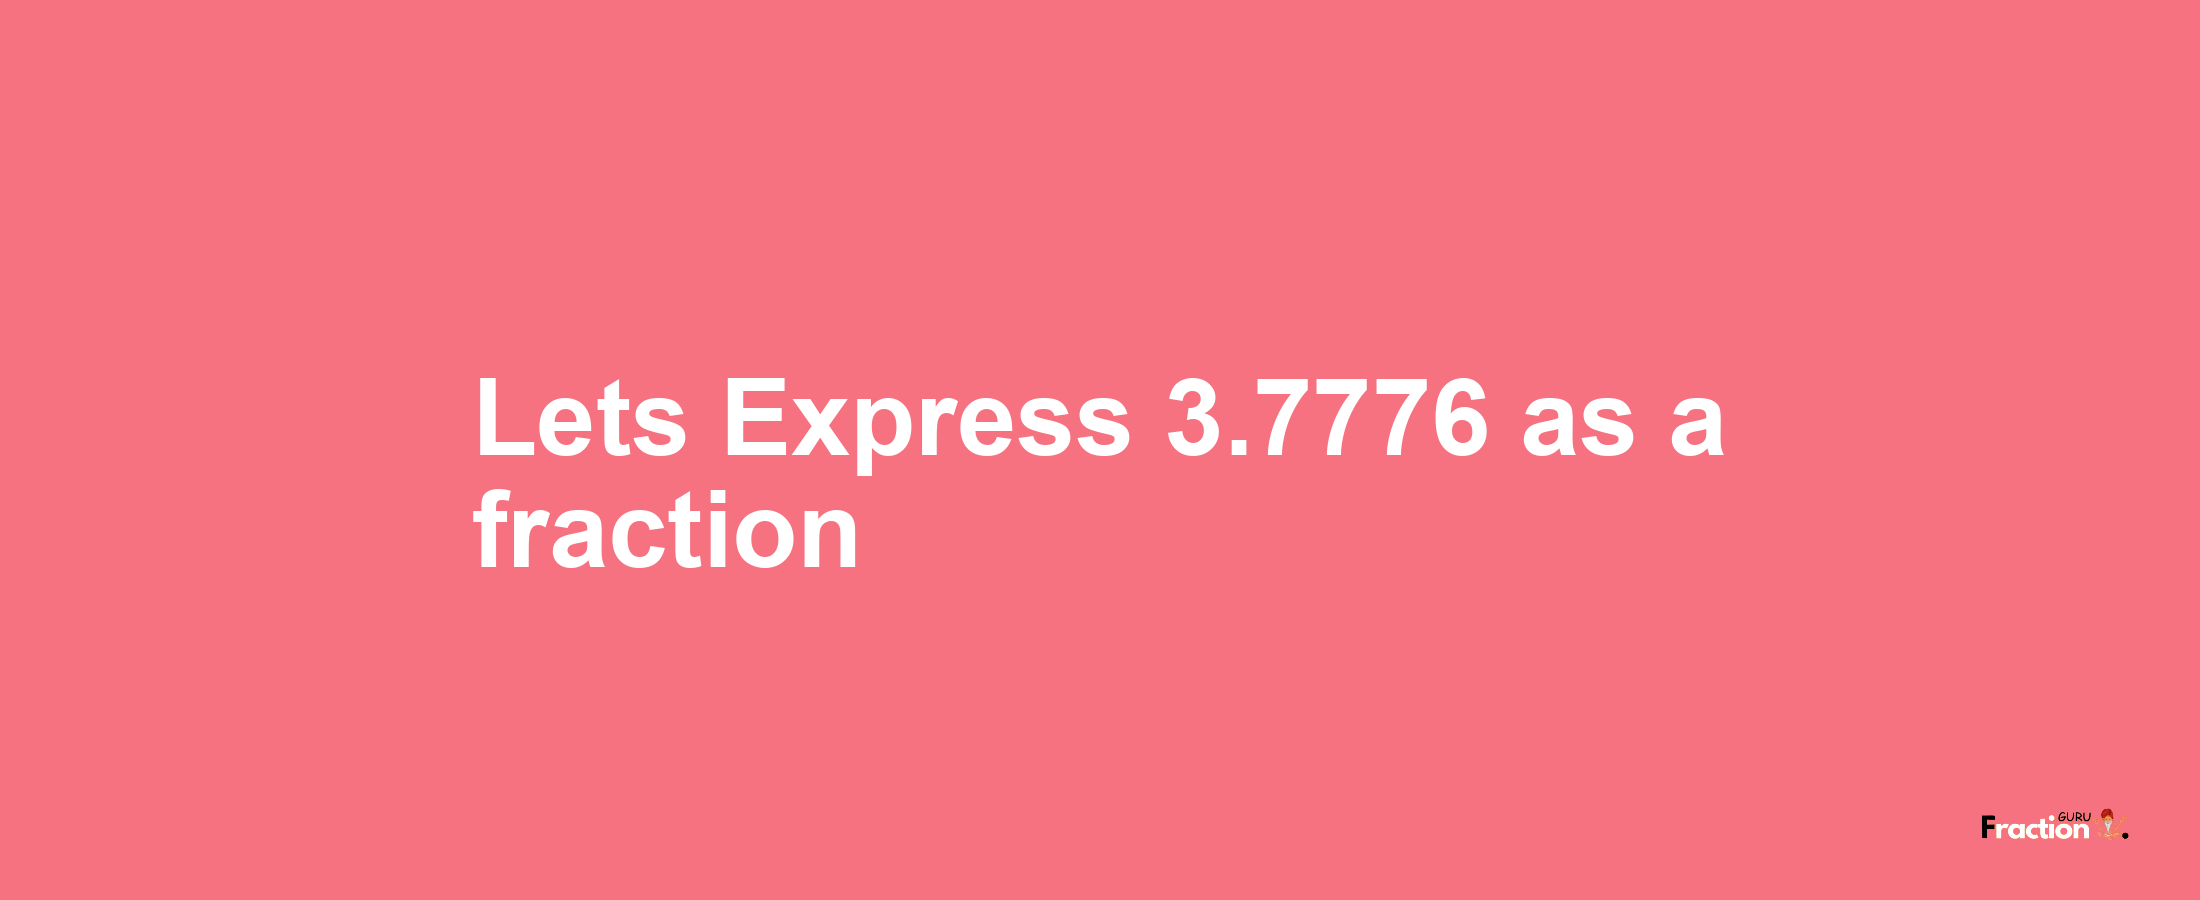 Lets Express 3.7776 as afraction